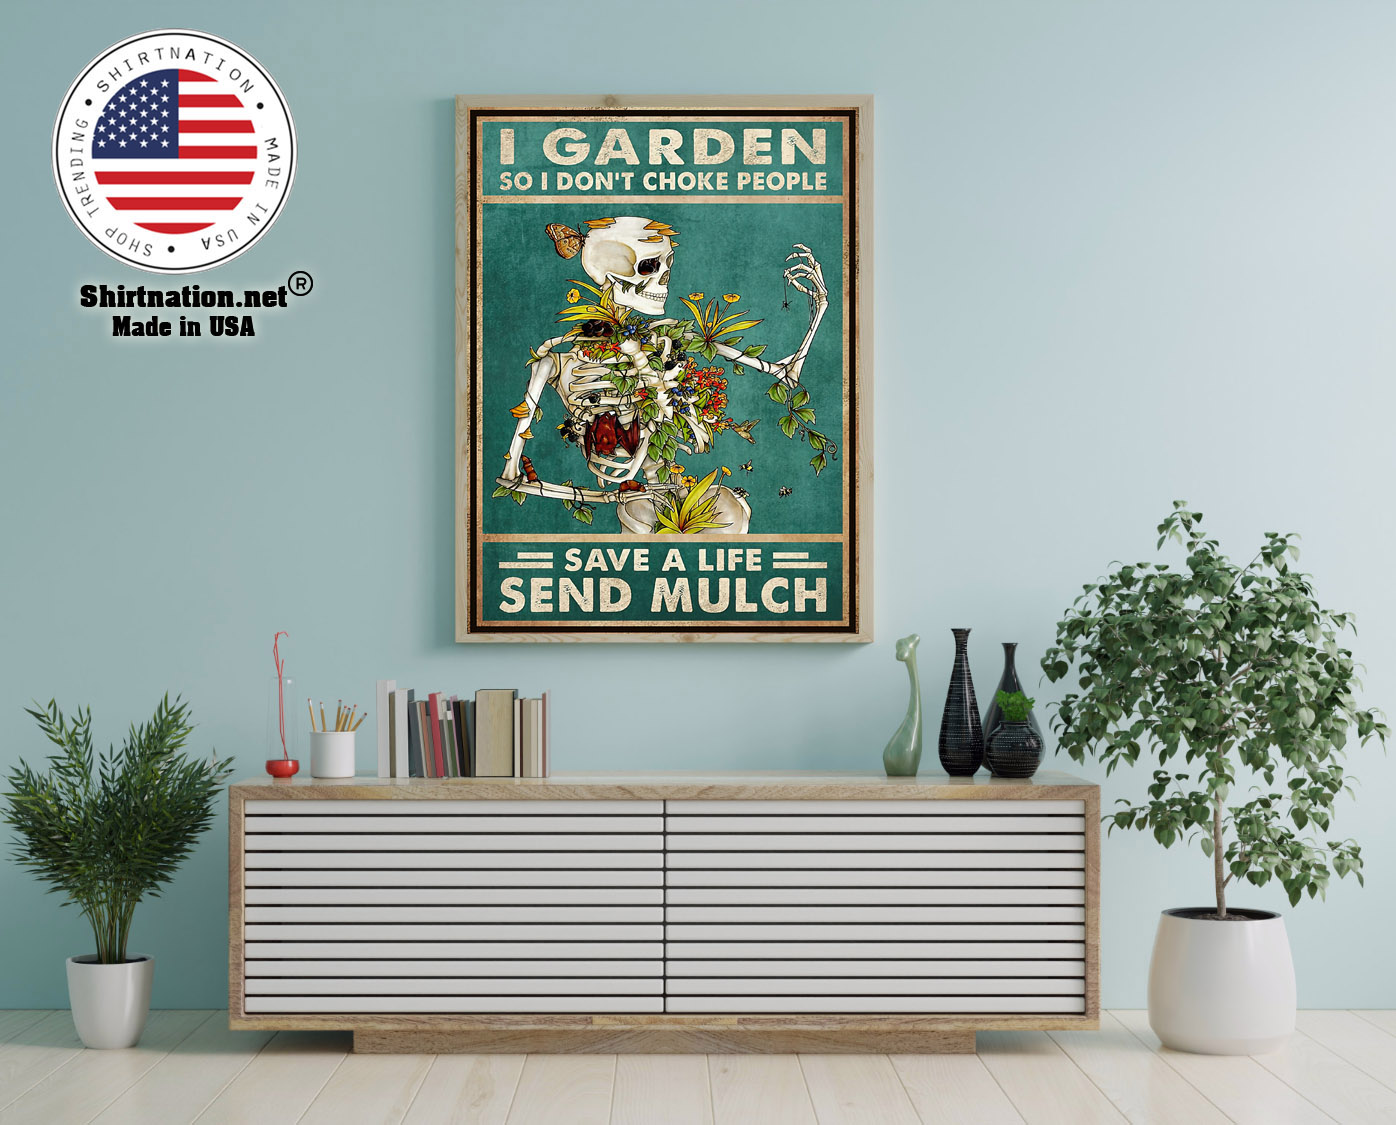 Skeleton I garden so I dont choke people save a life send mulch poster 12